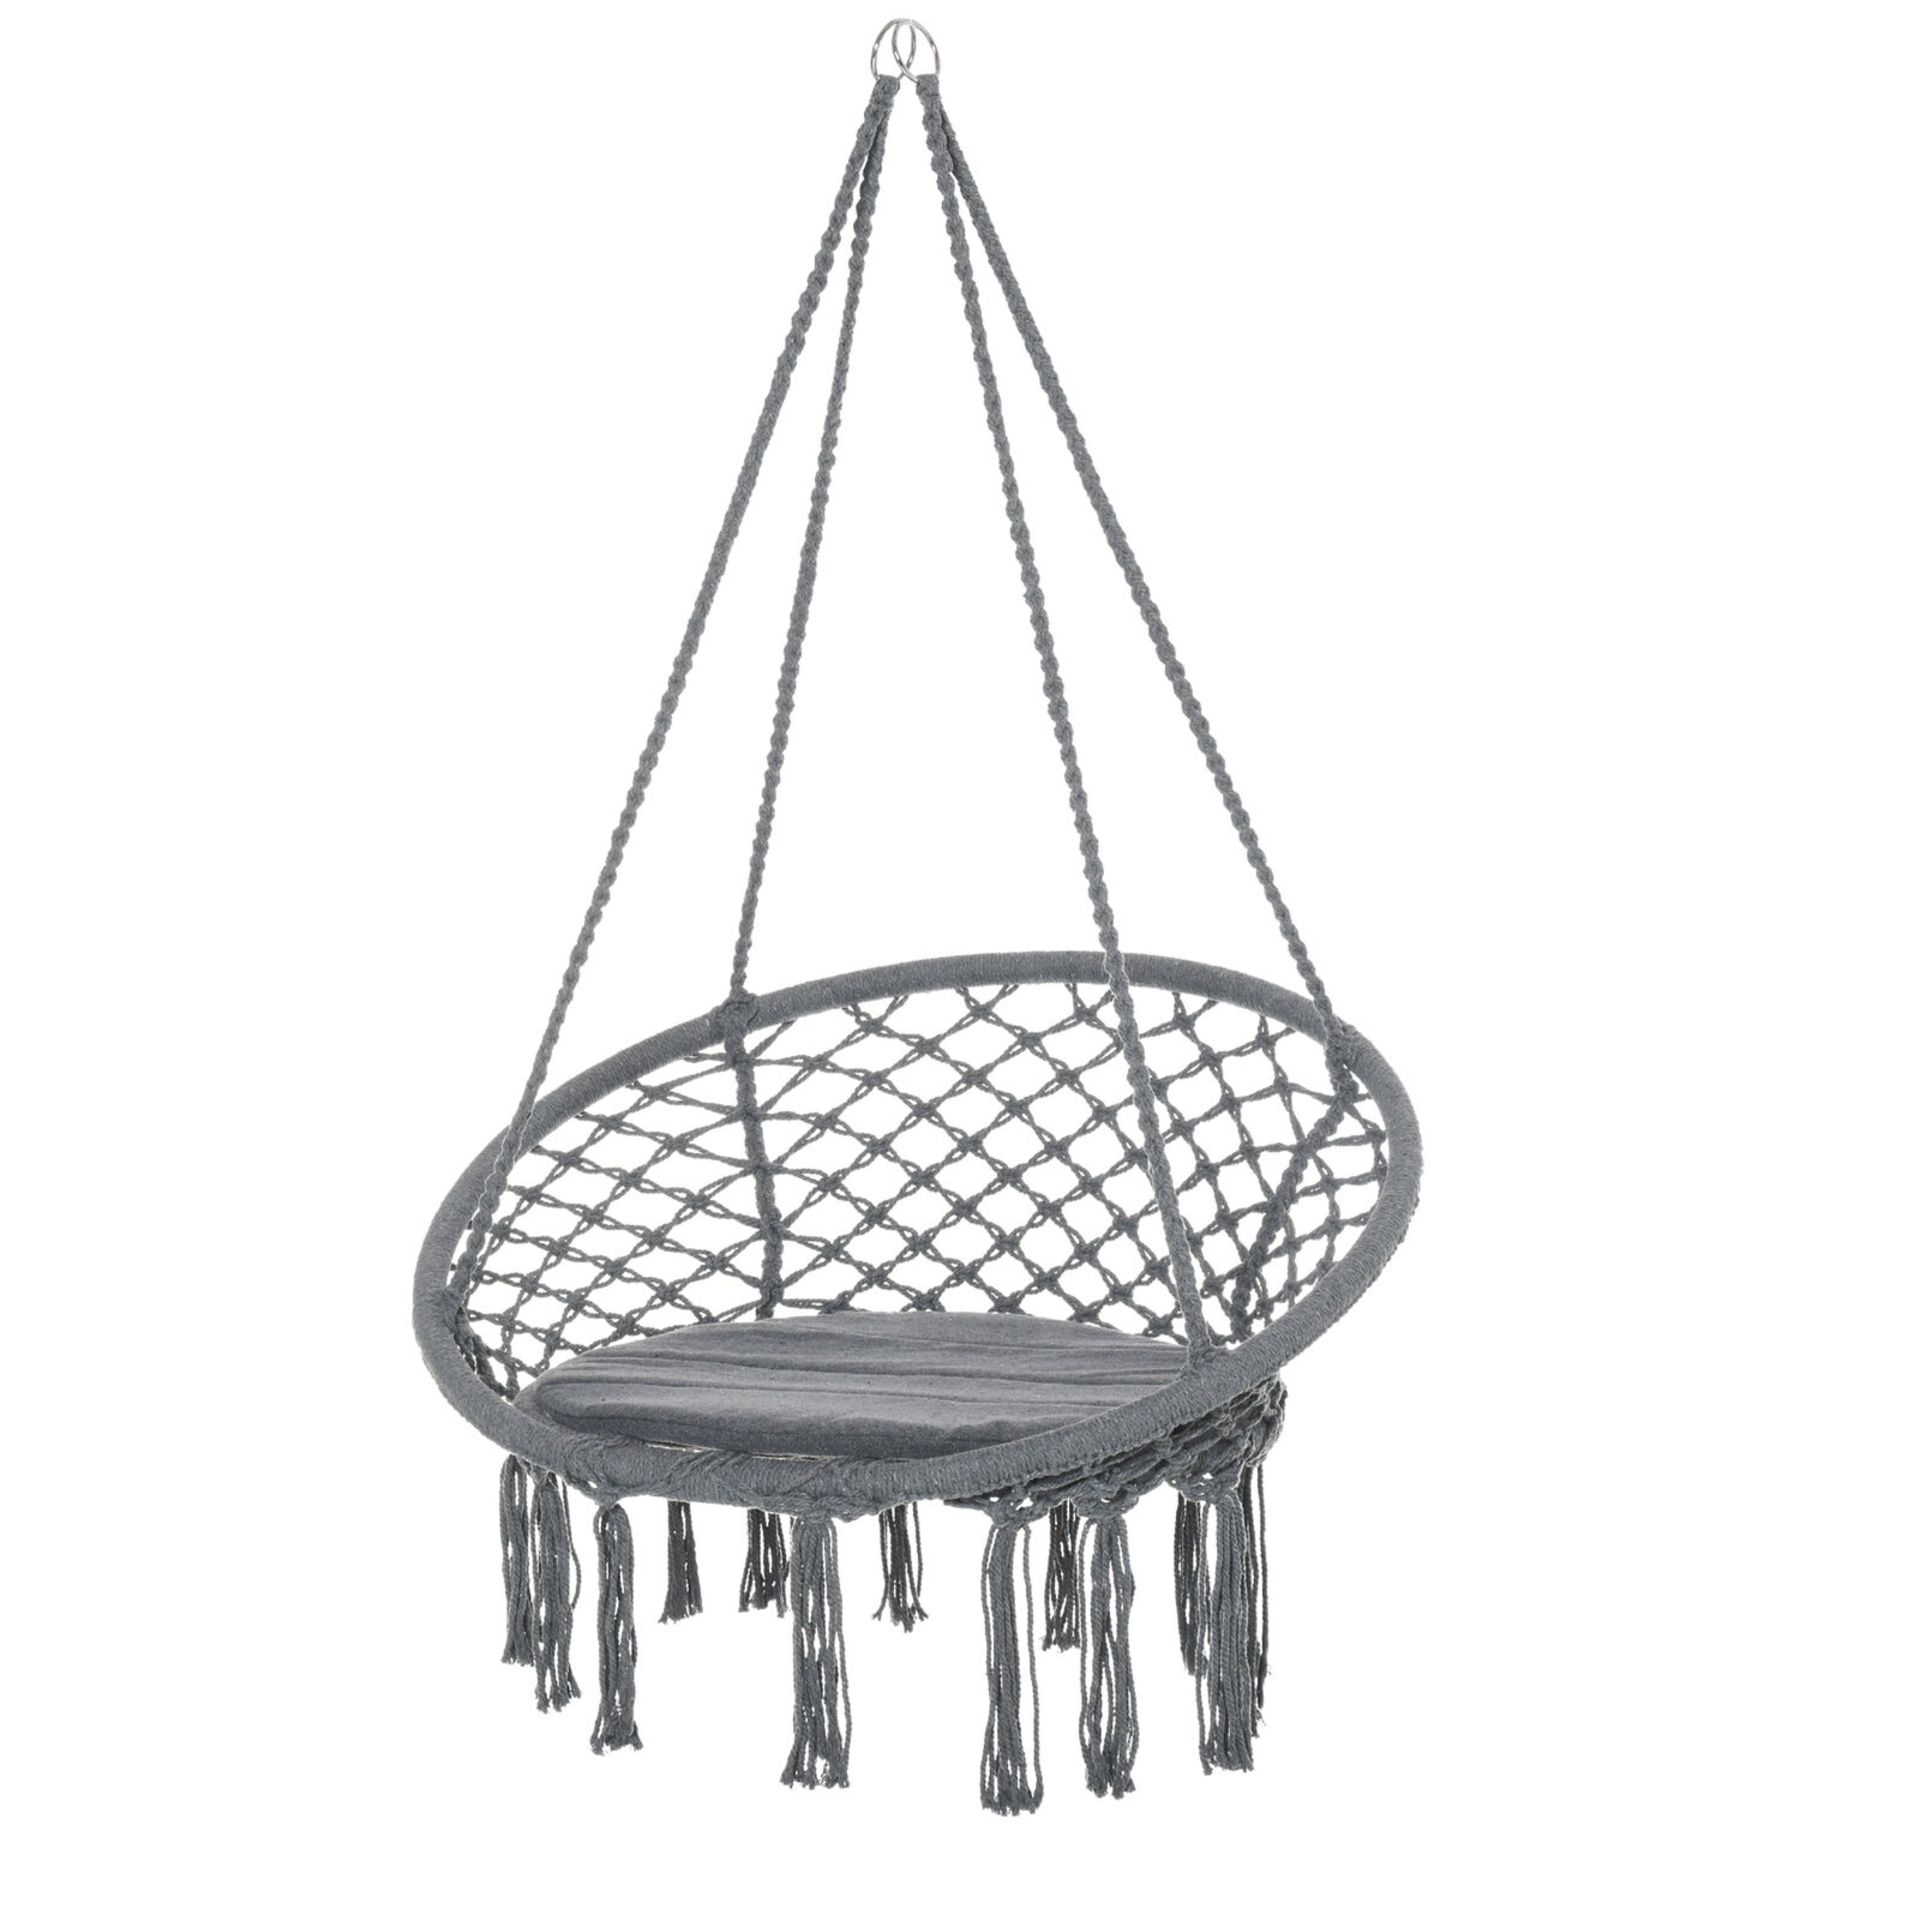 **NEW** MACRAME HANGING CHAIR SWING HAMMOCK FOR INDOOR & OUTDOOR USE GREY>>DELIVERY AVAILABLE<< - Image 2 of 2